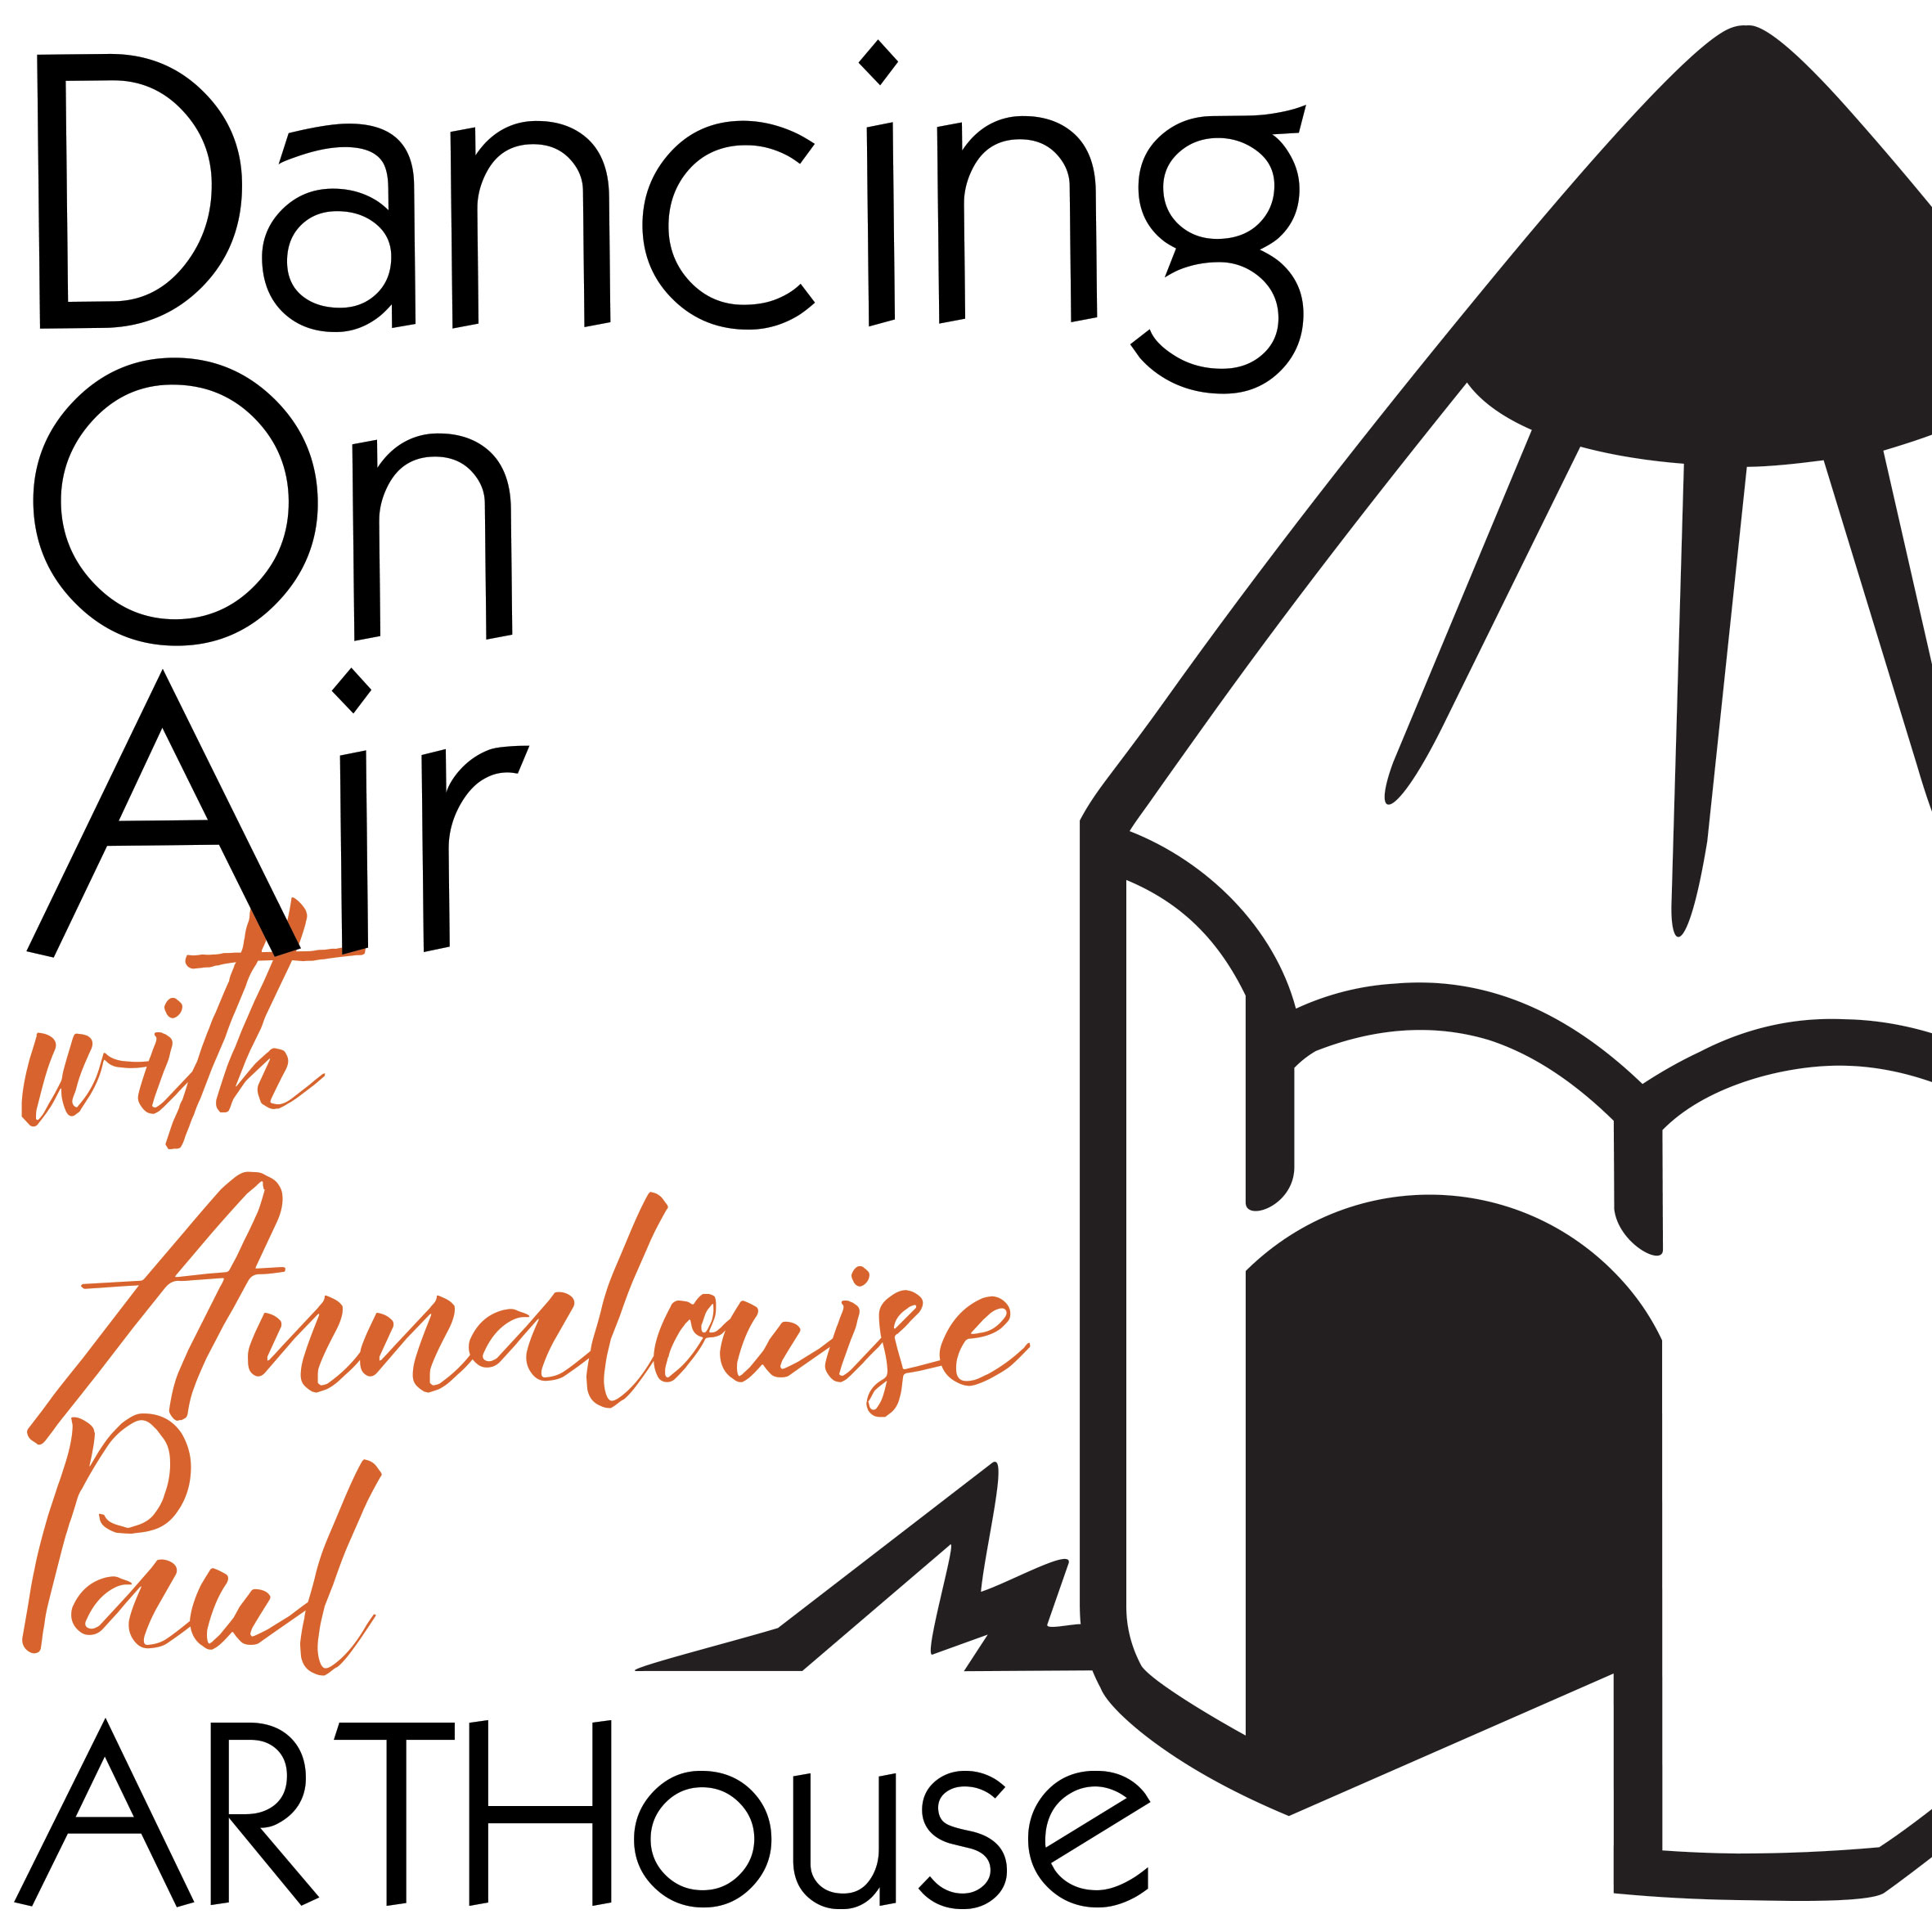 Dancing on air Podcasts